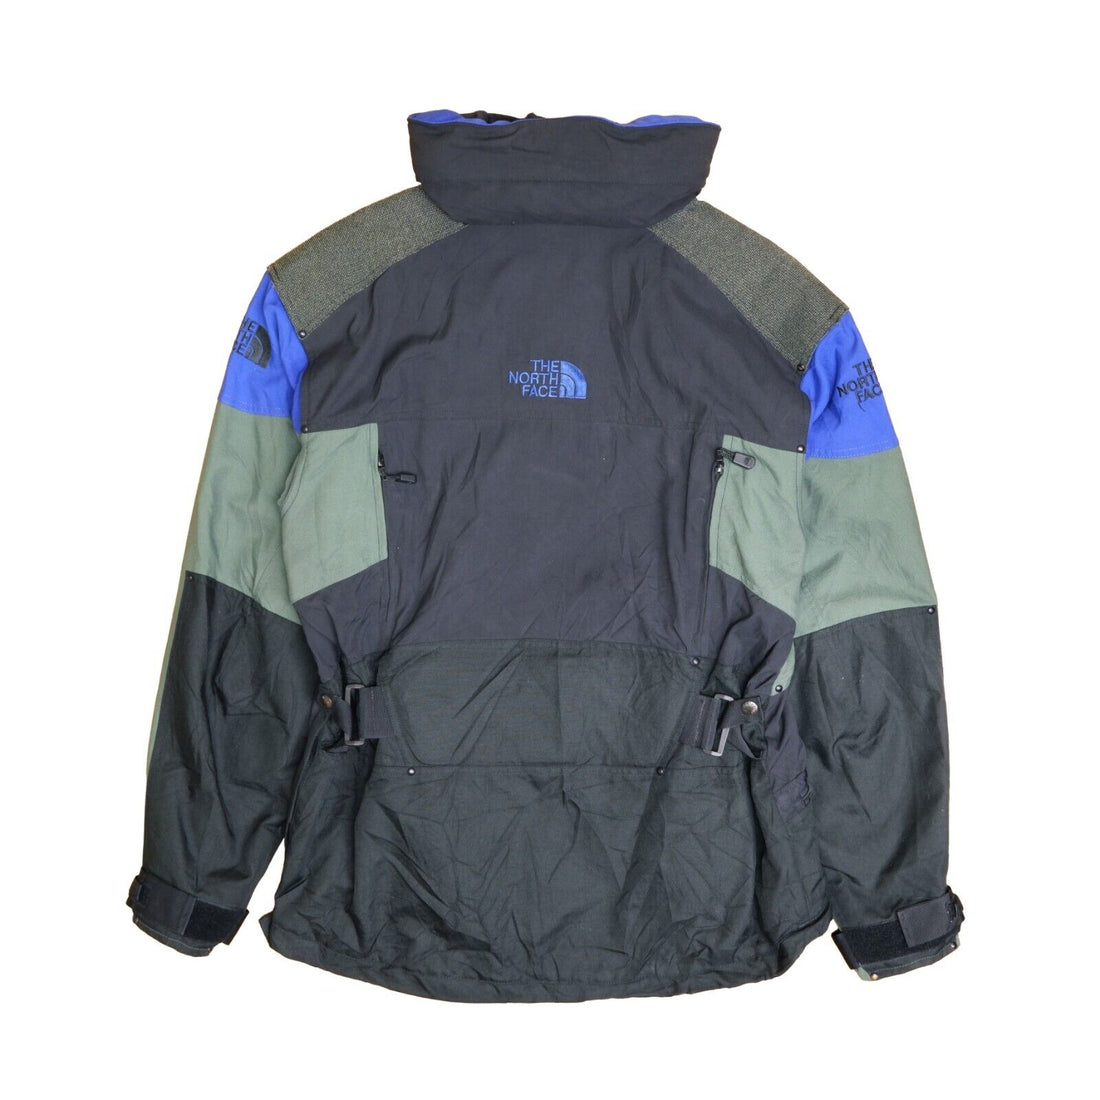 Vintage The North Face Steep Tech Jacket Size Large Blue